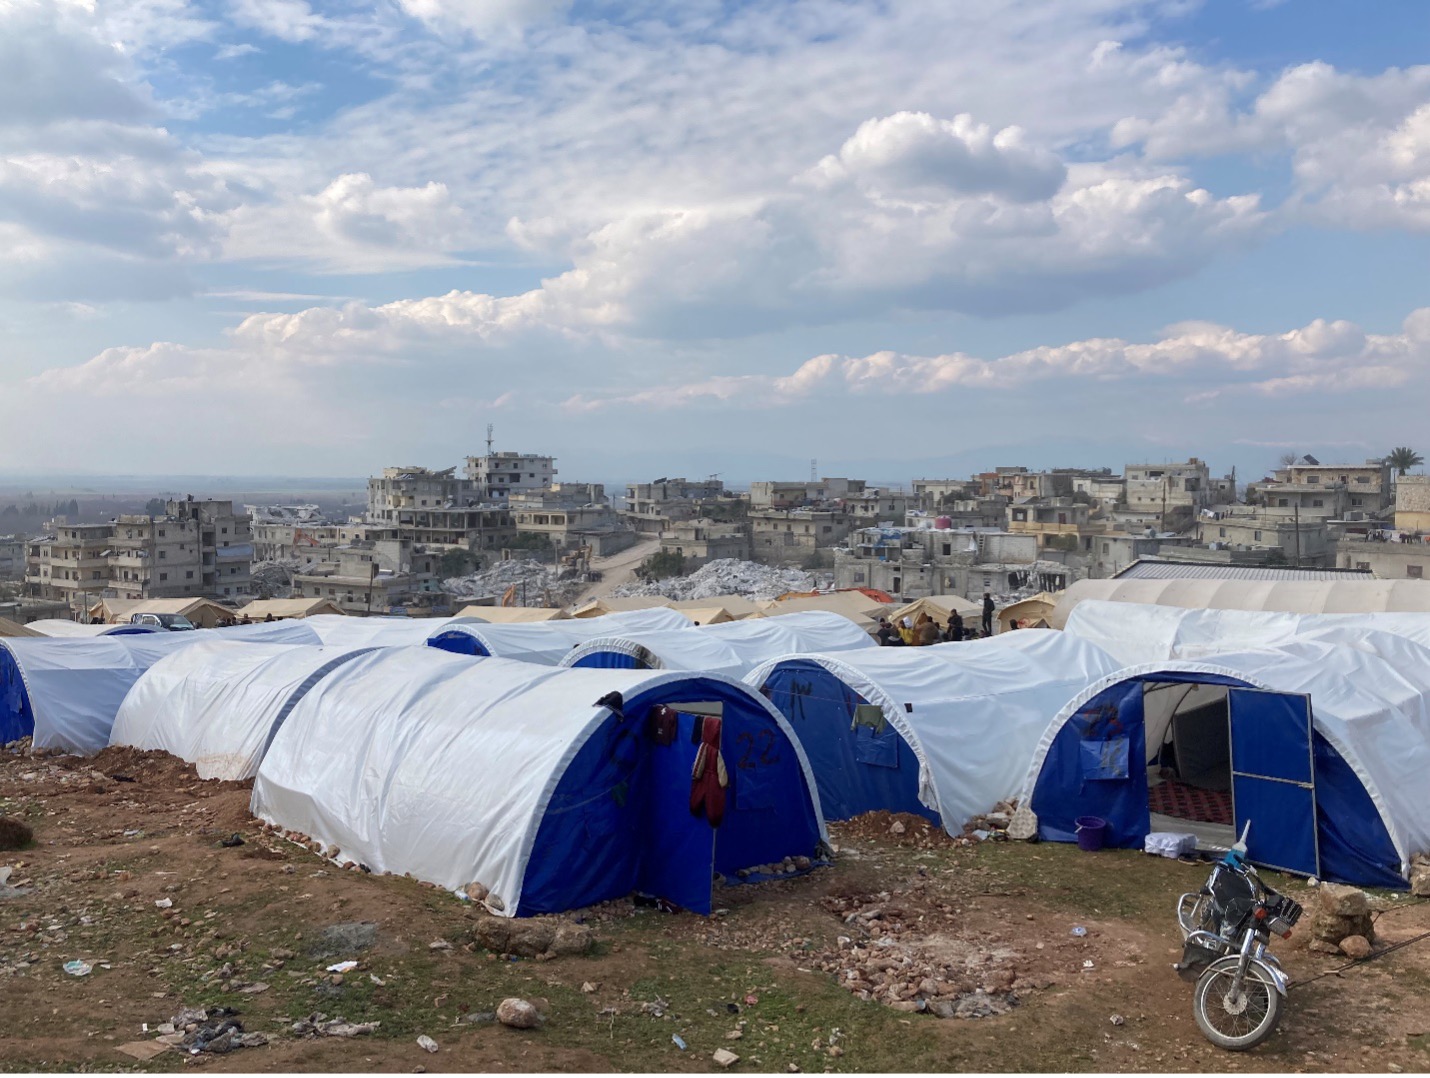 A new displaced persons camp in central Harem, adjacent to a block of collapsed apartment buildings. Photo by Gregory Waters.